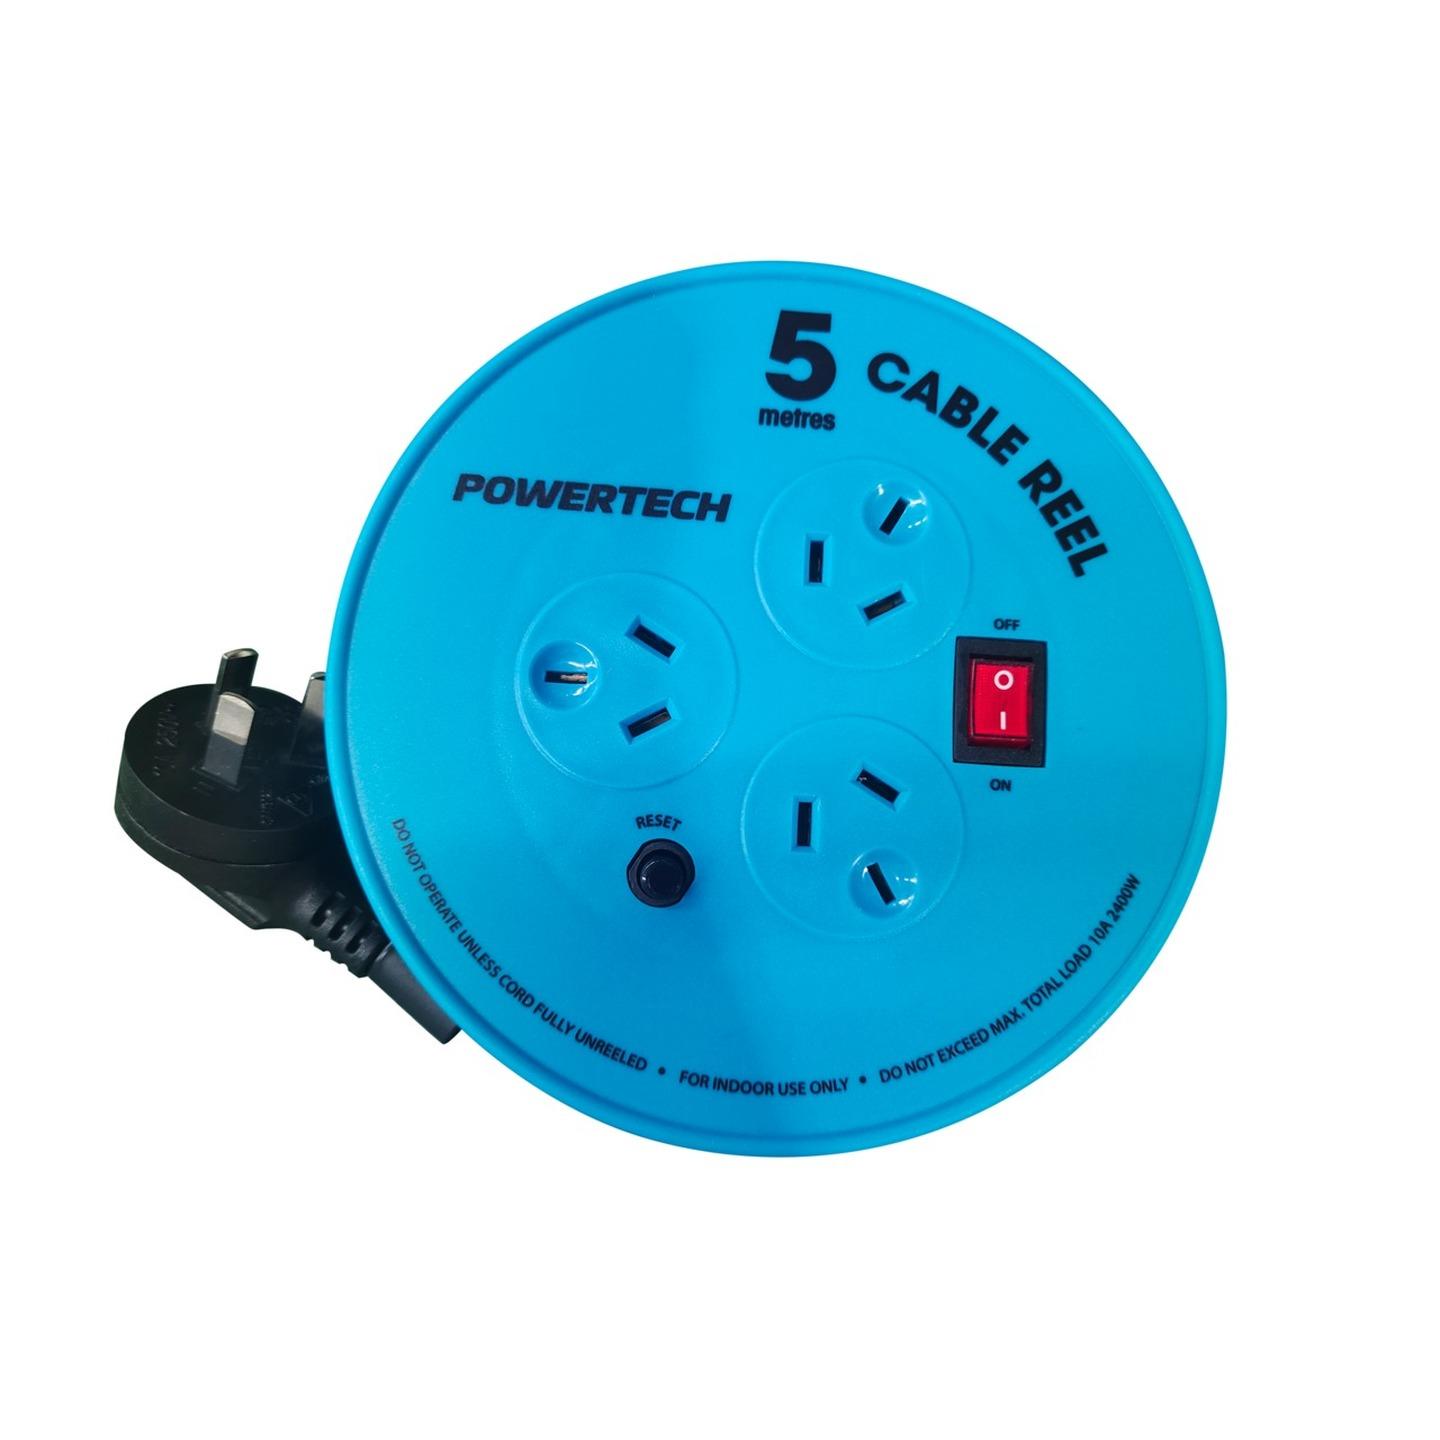 3 Way Round Powerboard With 5M Extension Cord